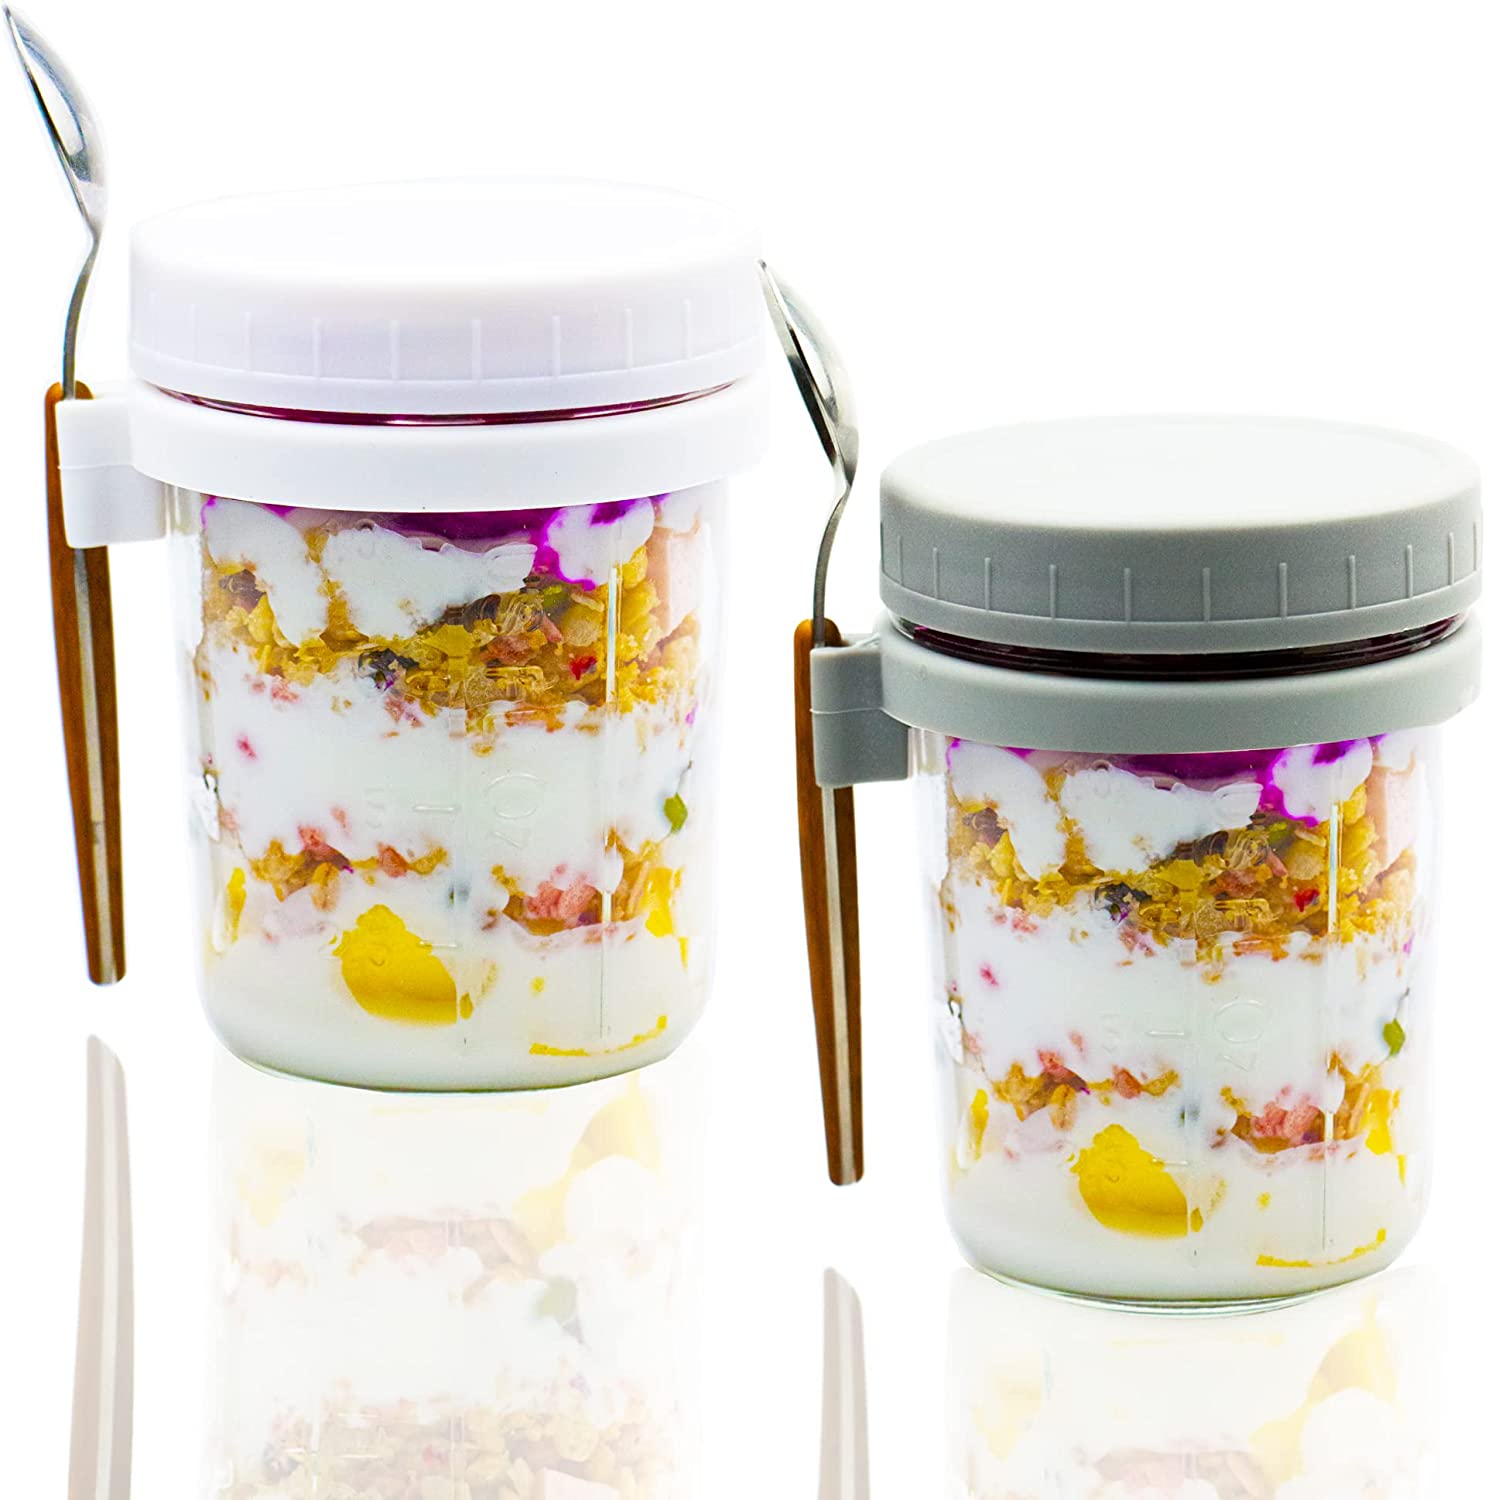 Overnight Oats Container Jar (4-Piece set) - 16 oz Plastic Containers with  Lids - Oatmeal Container to go, Portable Cereal and Milk Container on the  go